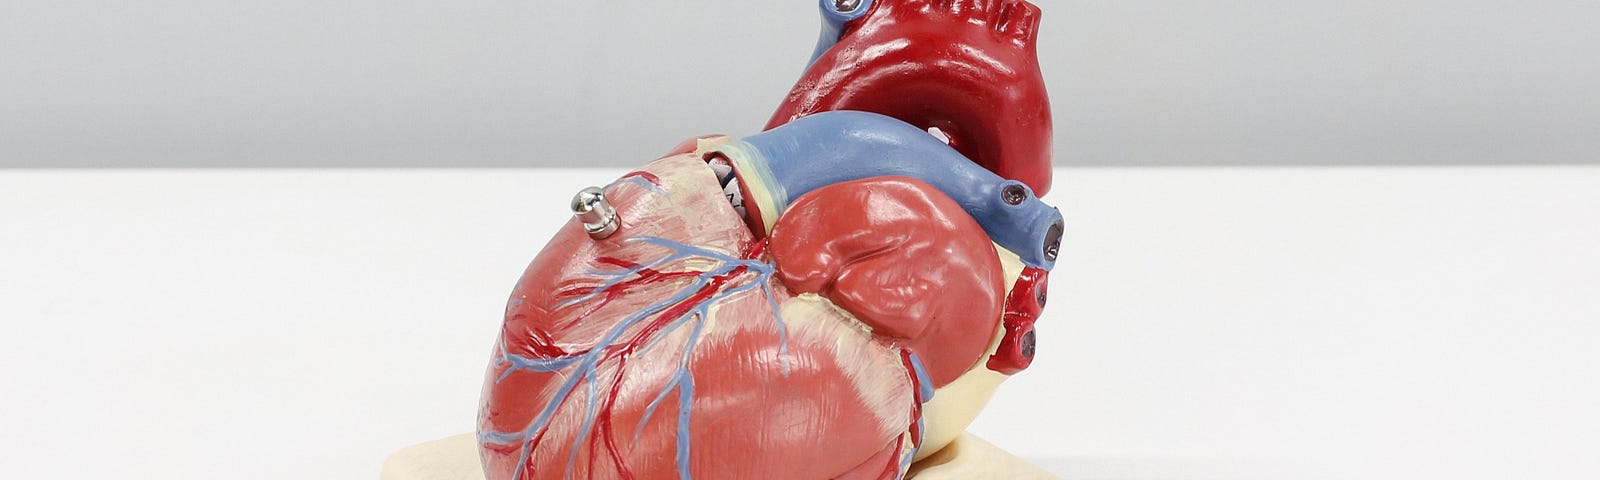 A picture of an artificial heart